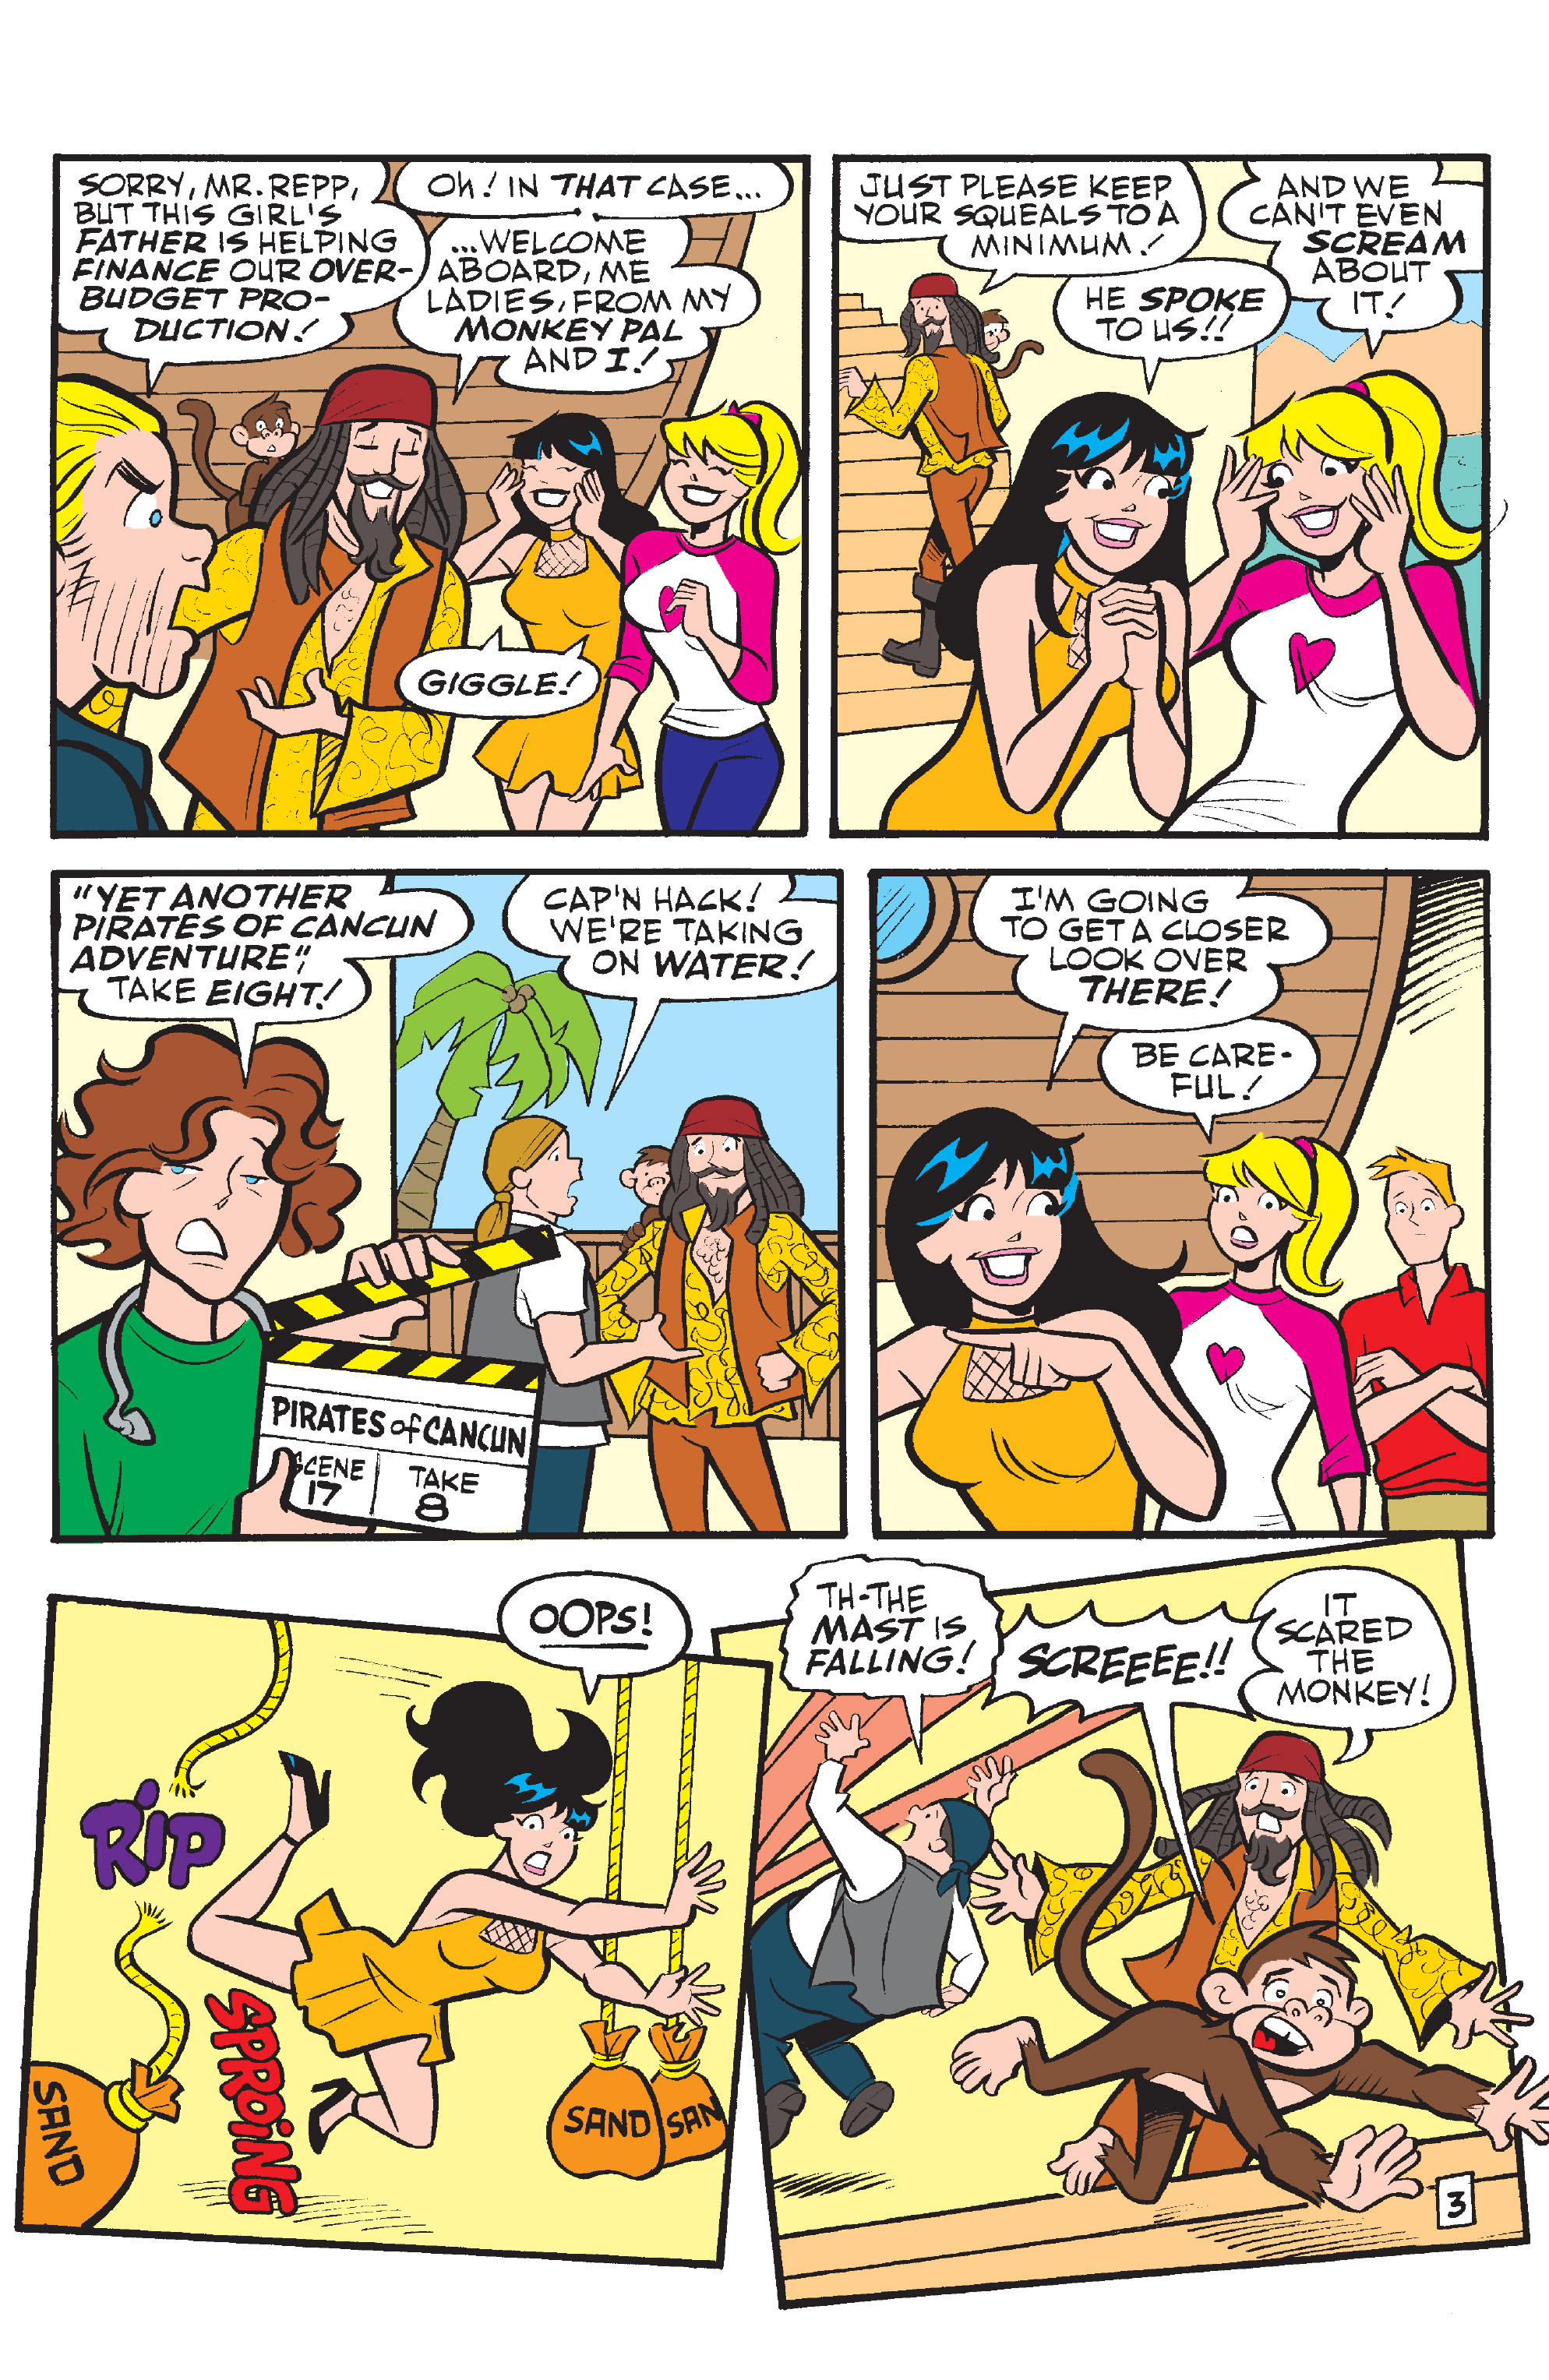 Betty & Veronica Best Friends Forever: At Movies (2018): Chapter 1 - Page 5